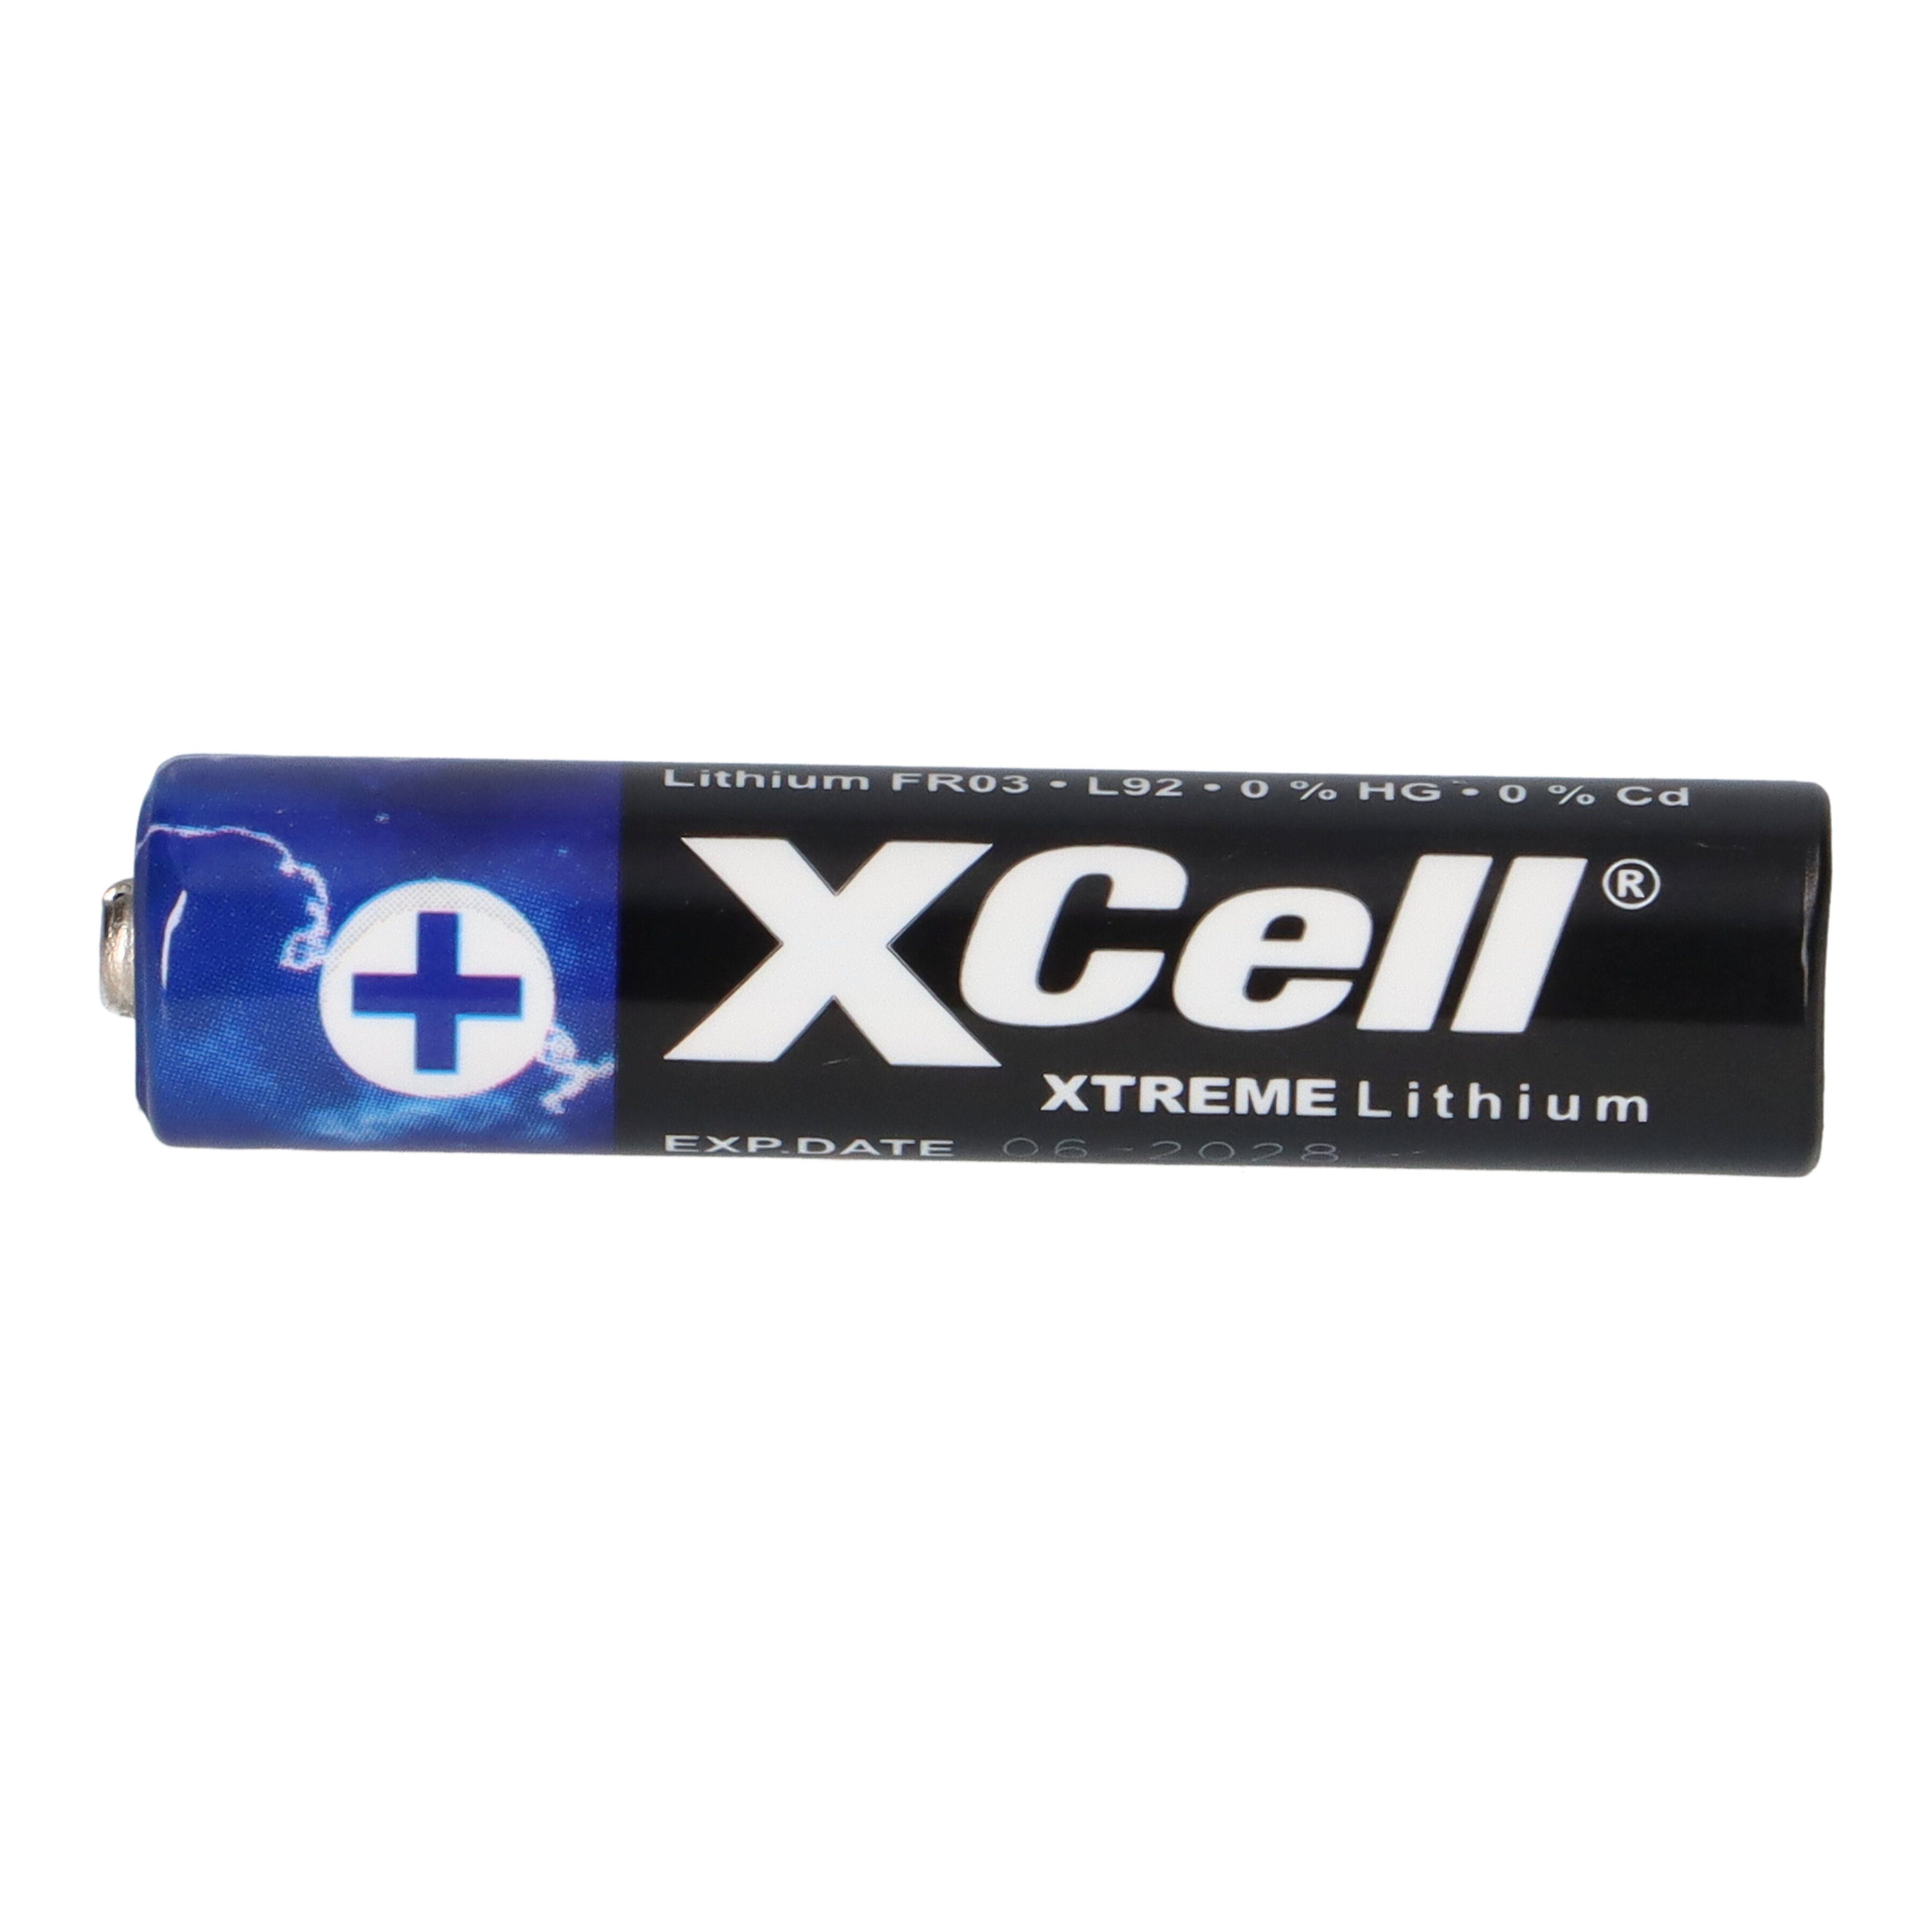 XCell XTREME Lithium FR03 Micro L92 AAA Blister Batterie Batterie 4er XCell